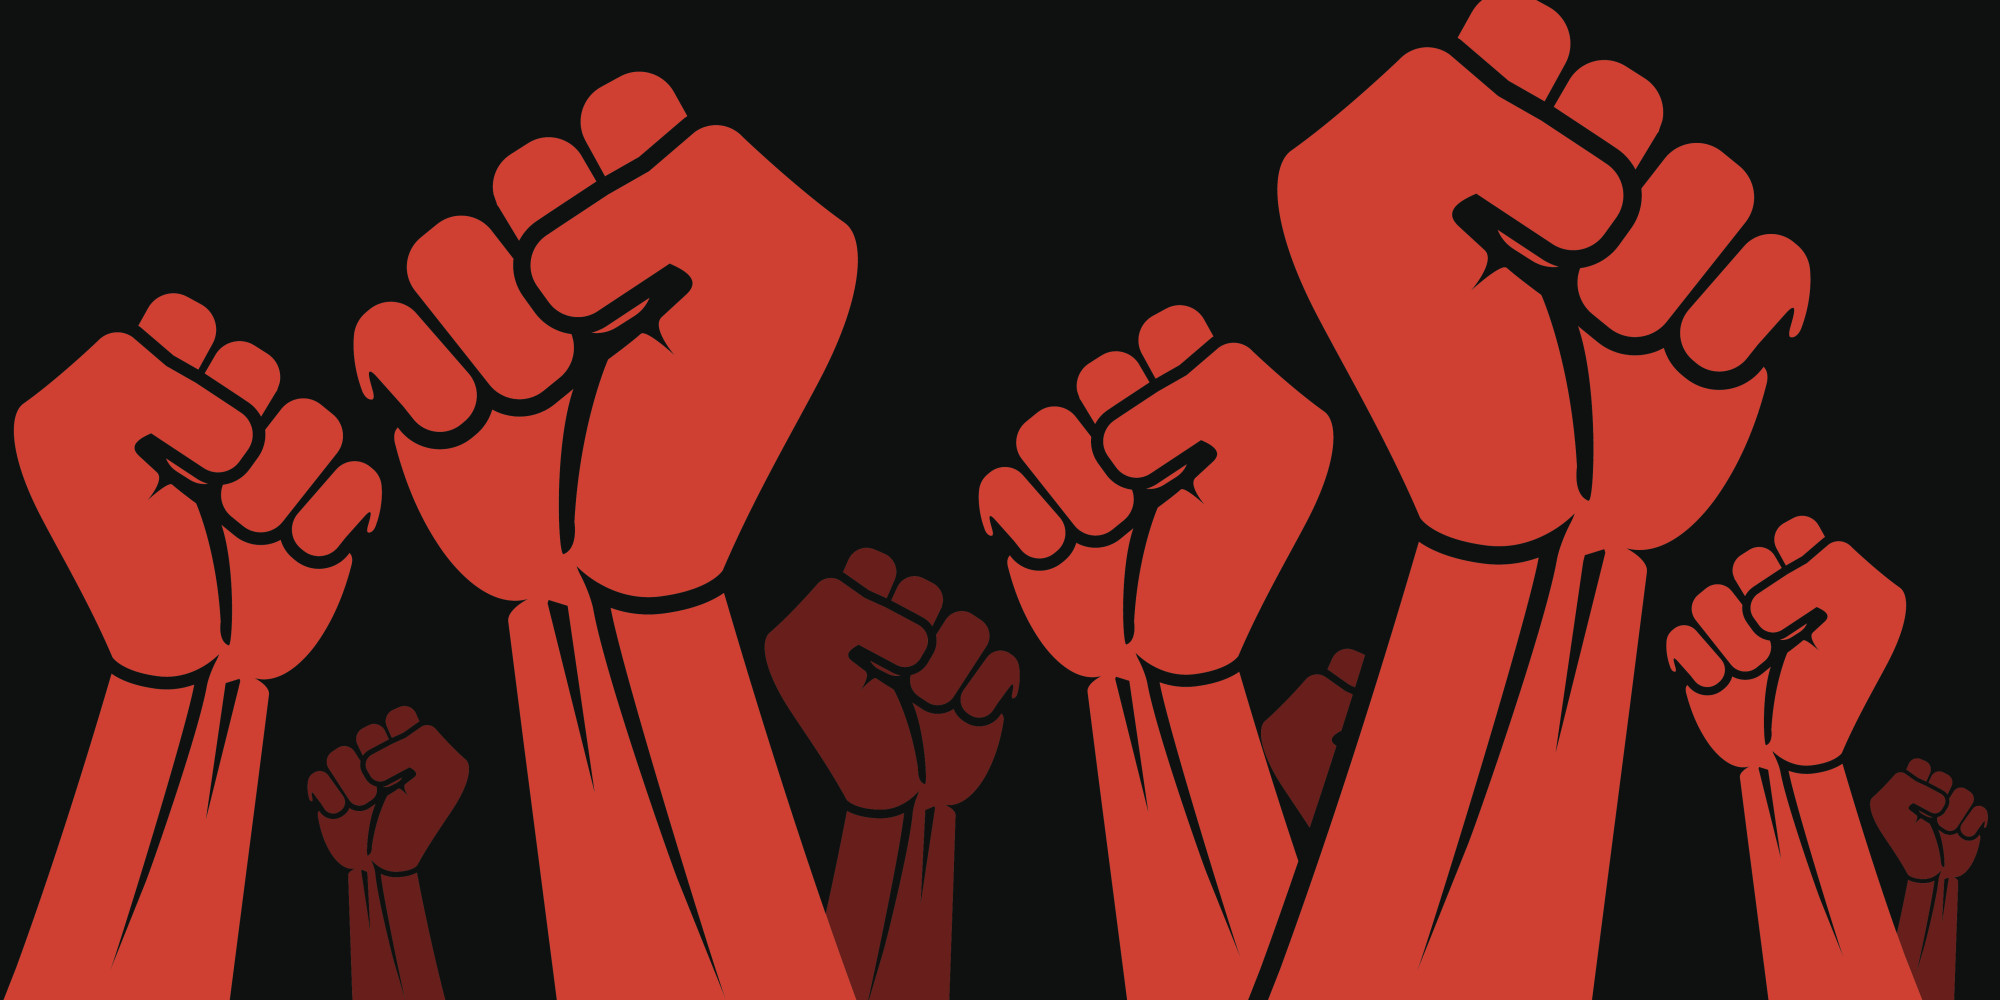 Clenched fist held in protest vector illustration. Panoramic